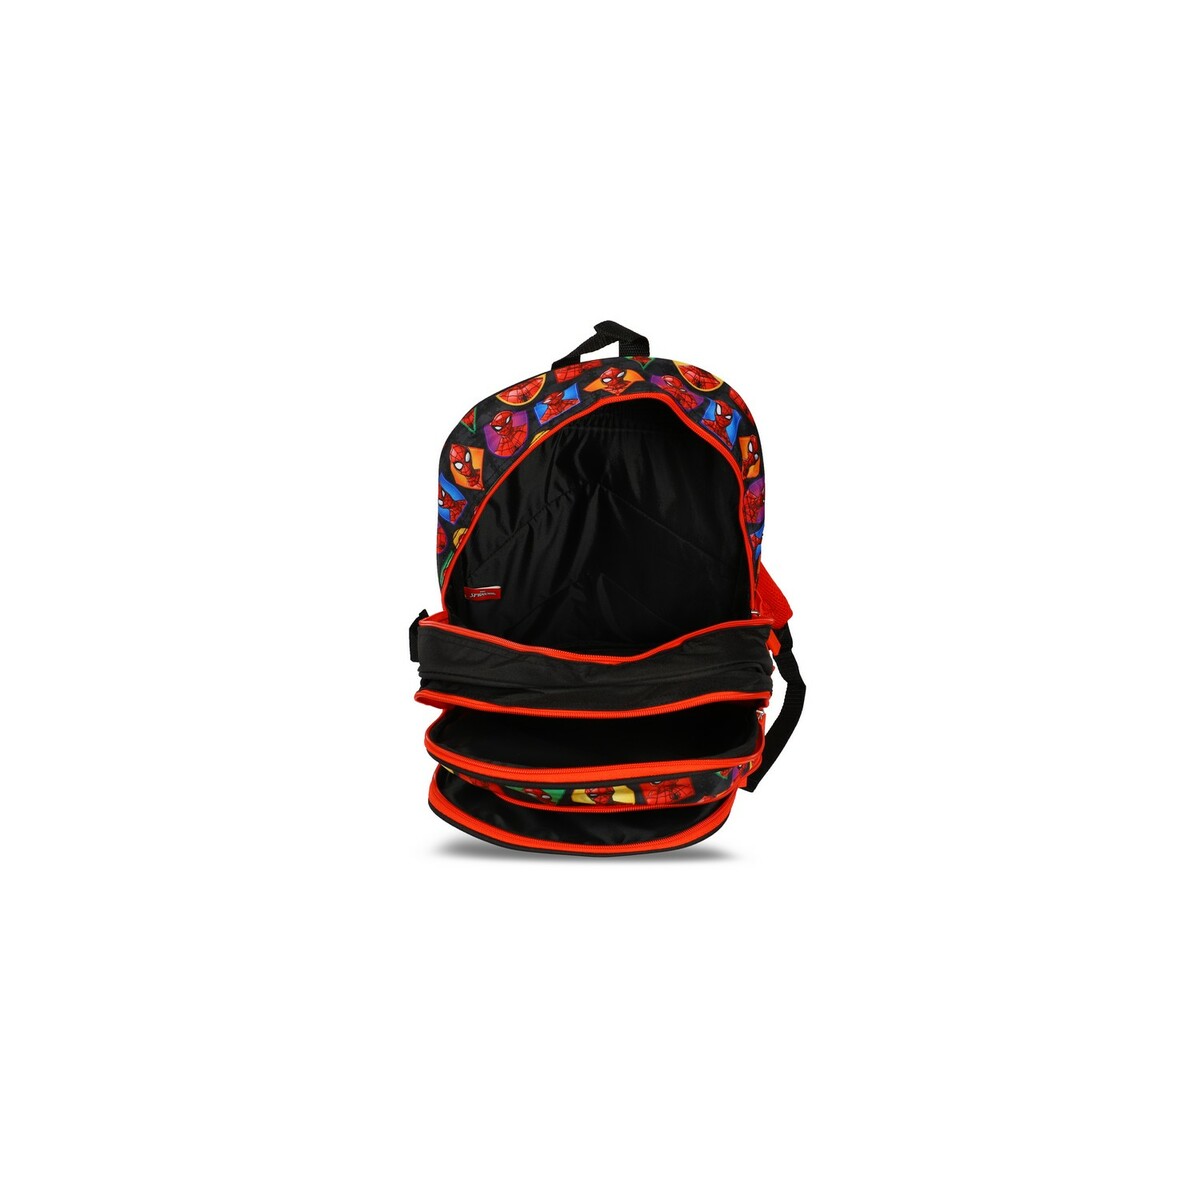 Spiderman TeamUp Backpack 16inch-WDP1543